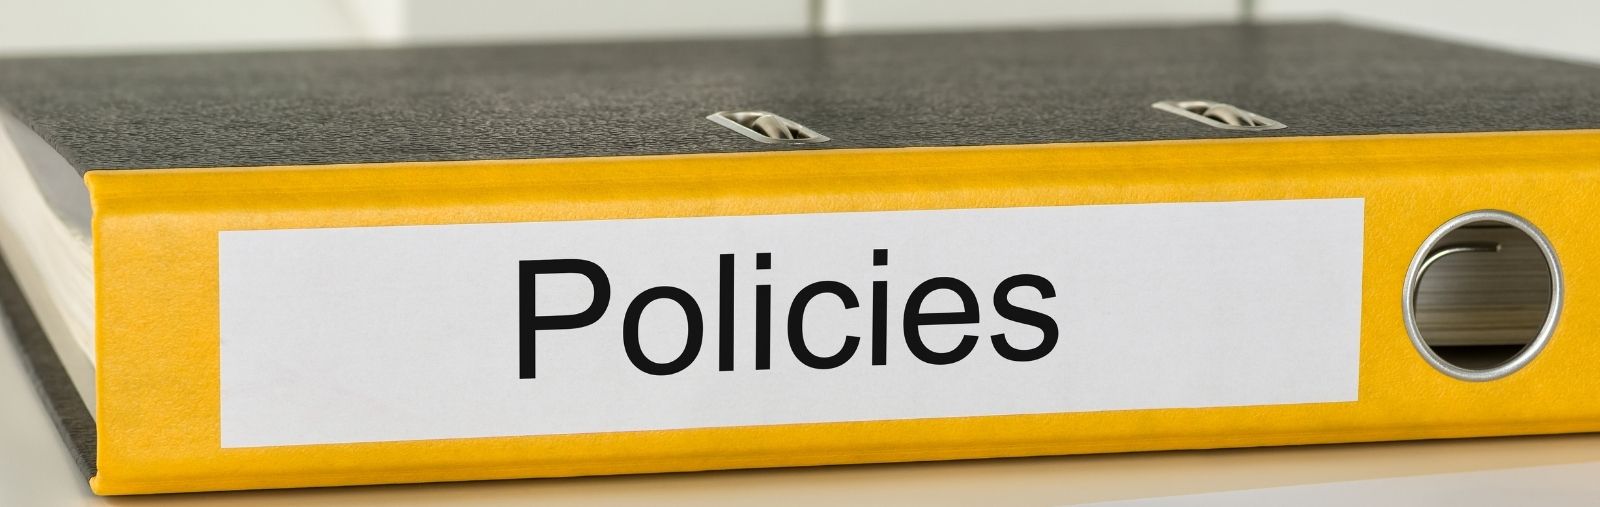 A binder labeled "Policies" on a table